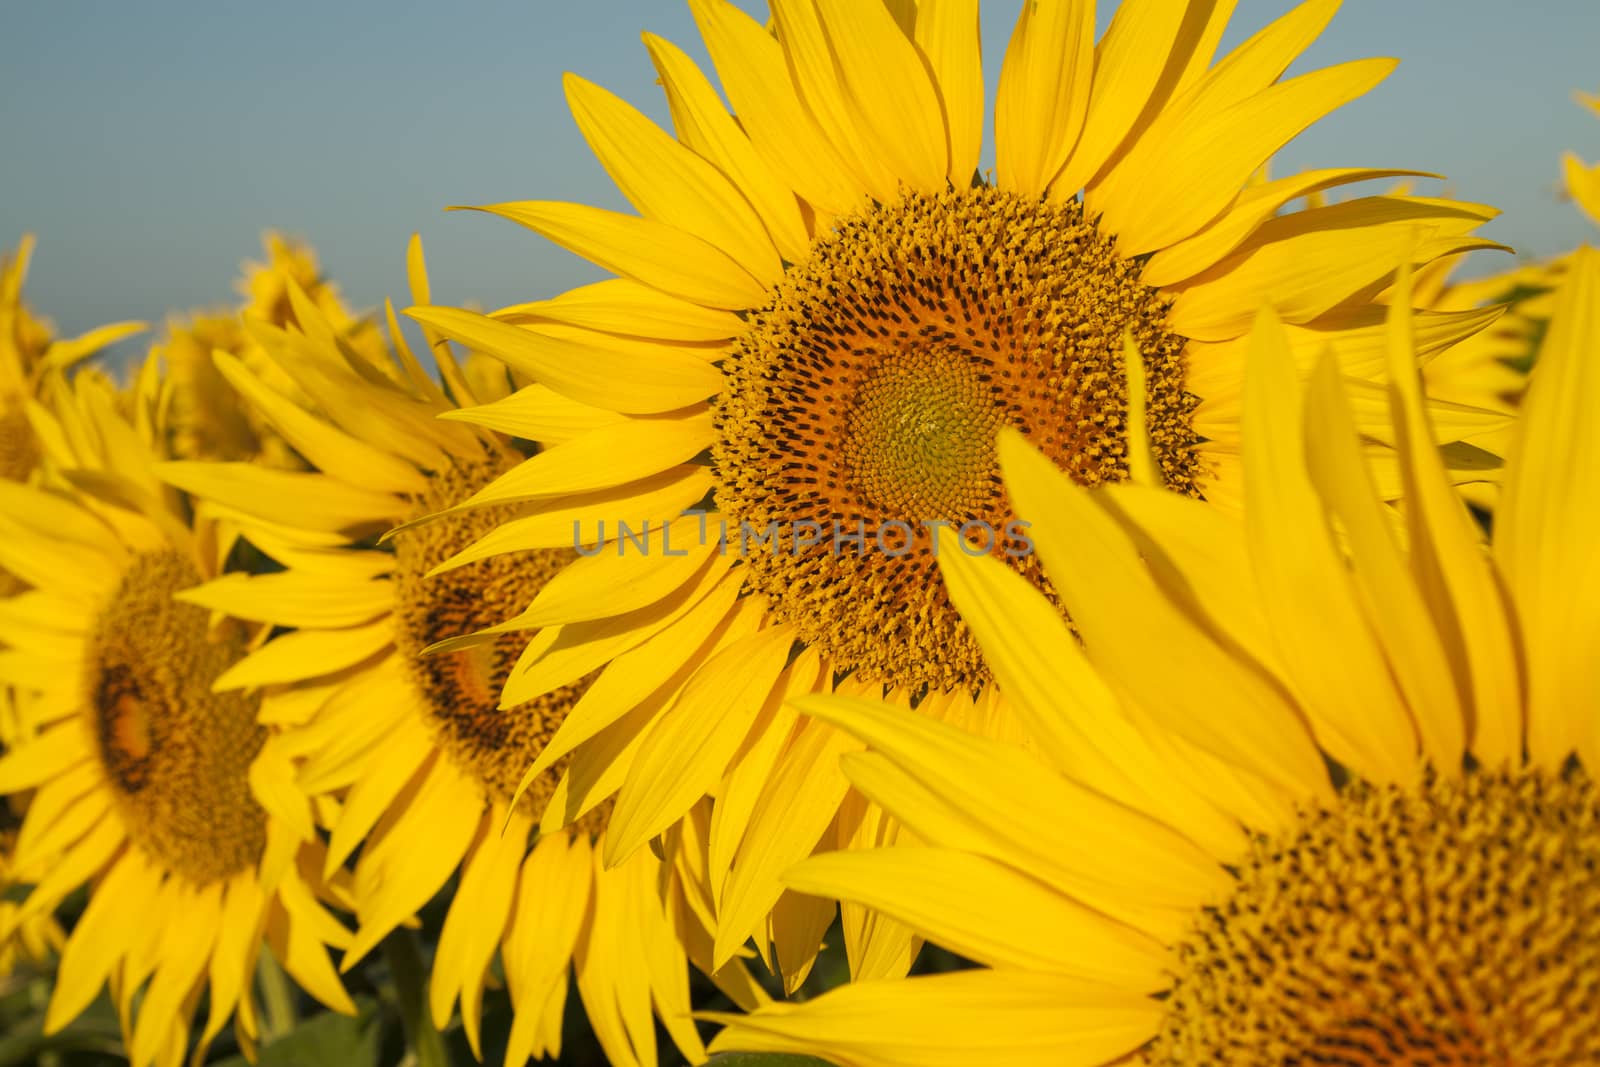 View of a sunflower with sunflowers in the background